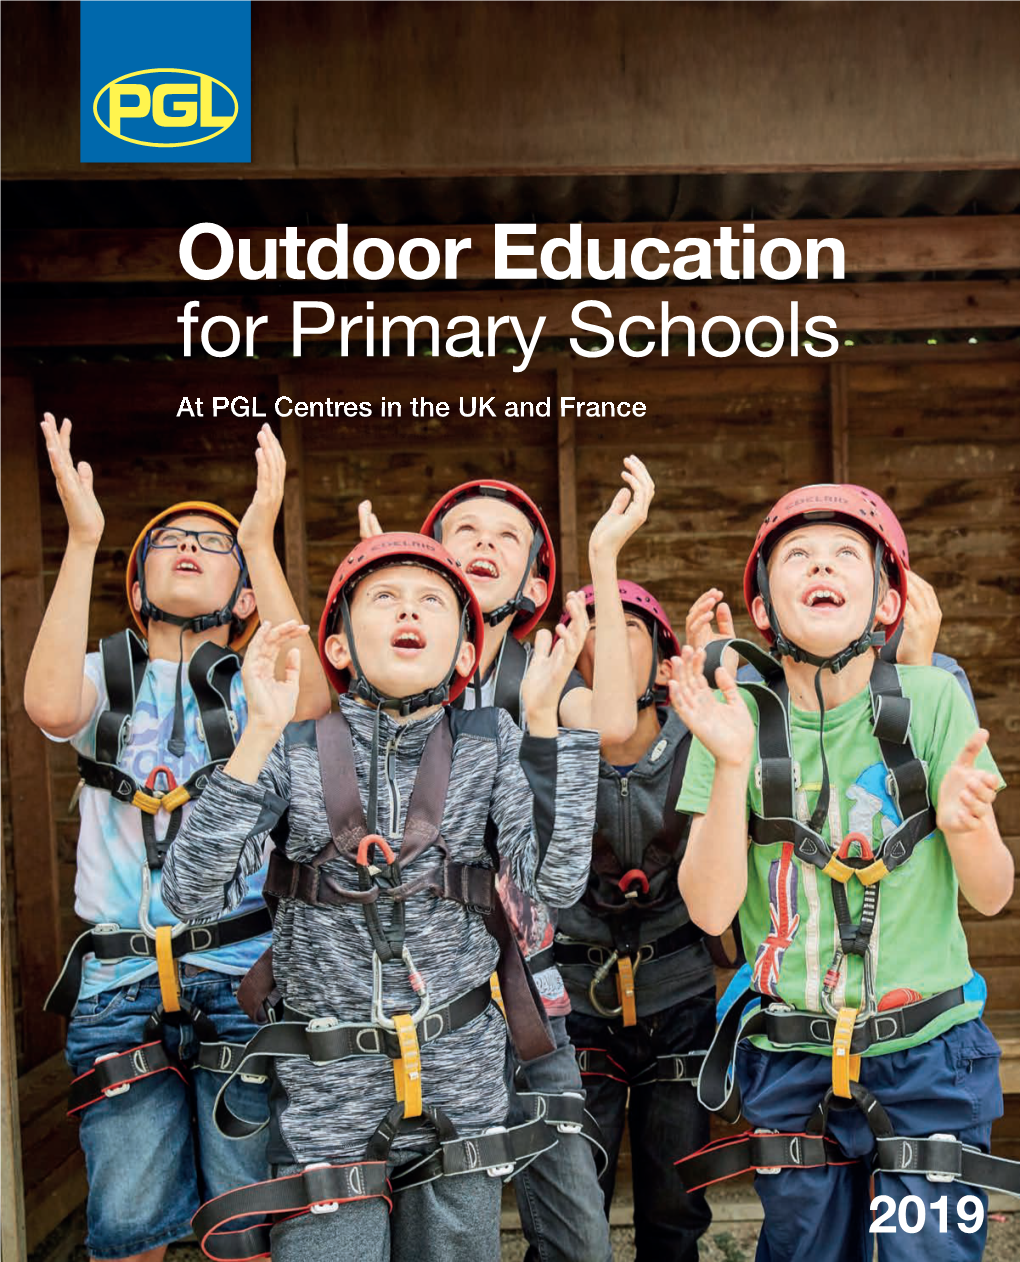 Outdoor Education for Primary Schools at PGL Centres in the UK and France